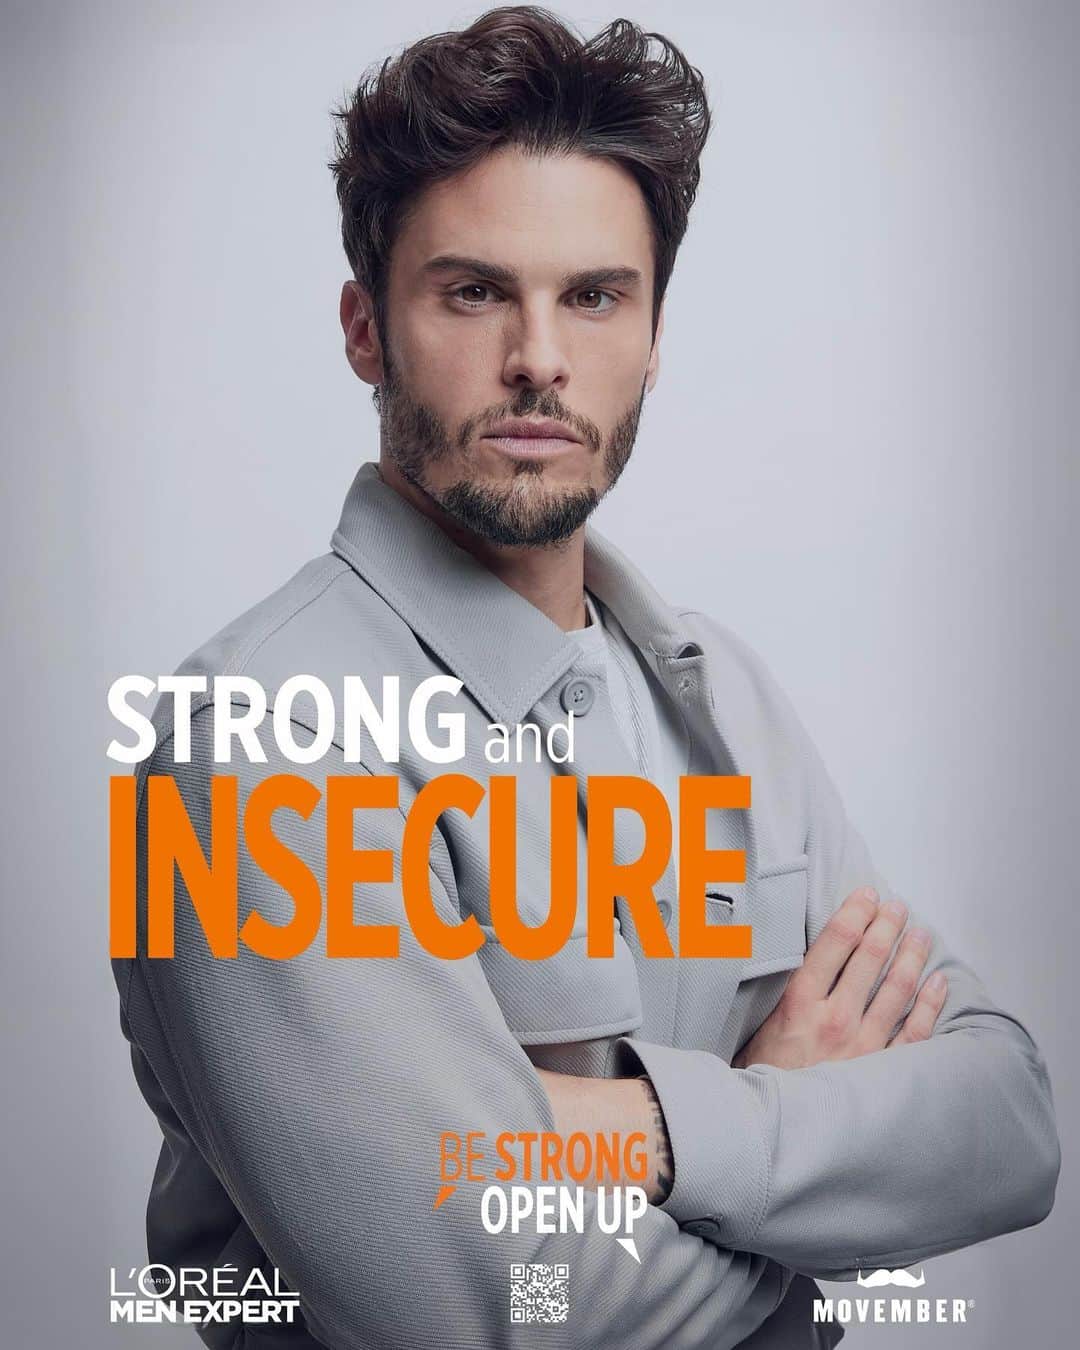 Baptiste Giabiconiのインスタグラム：「Be strong. Open up. Be strong, be insecure. At L'Oréal, we believe that strength comes in many forms.   We want to break the silence around men's mental health. We want to groom more than just beards. We want to encourage a culture of support. For 6 years running, L'Oréal Men Expert has proudly joined forces with @Movember to raise awareness of men's mental health.  This November, join us in this important mission. Grow your best moustache to grab attention and start important conversations. Let's encourage open conversations. Opening up to what’s on your mind can improve your mental fitness. So be strong, open up. 🧡 Learn more on movember.com  #movember  #bestrongopenup  #loreal #createthebeautythatmovestheworld」